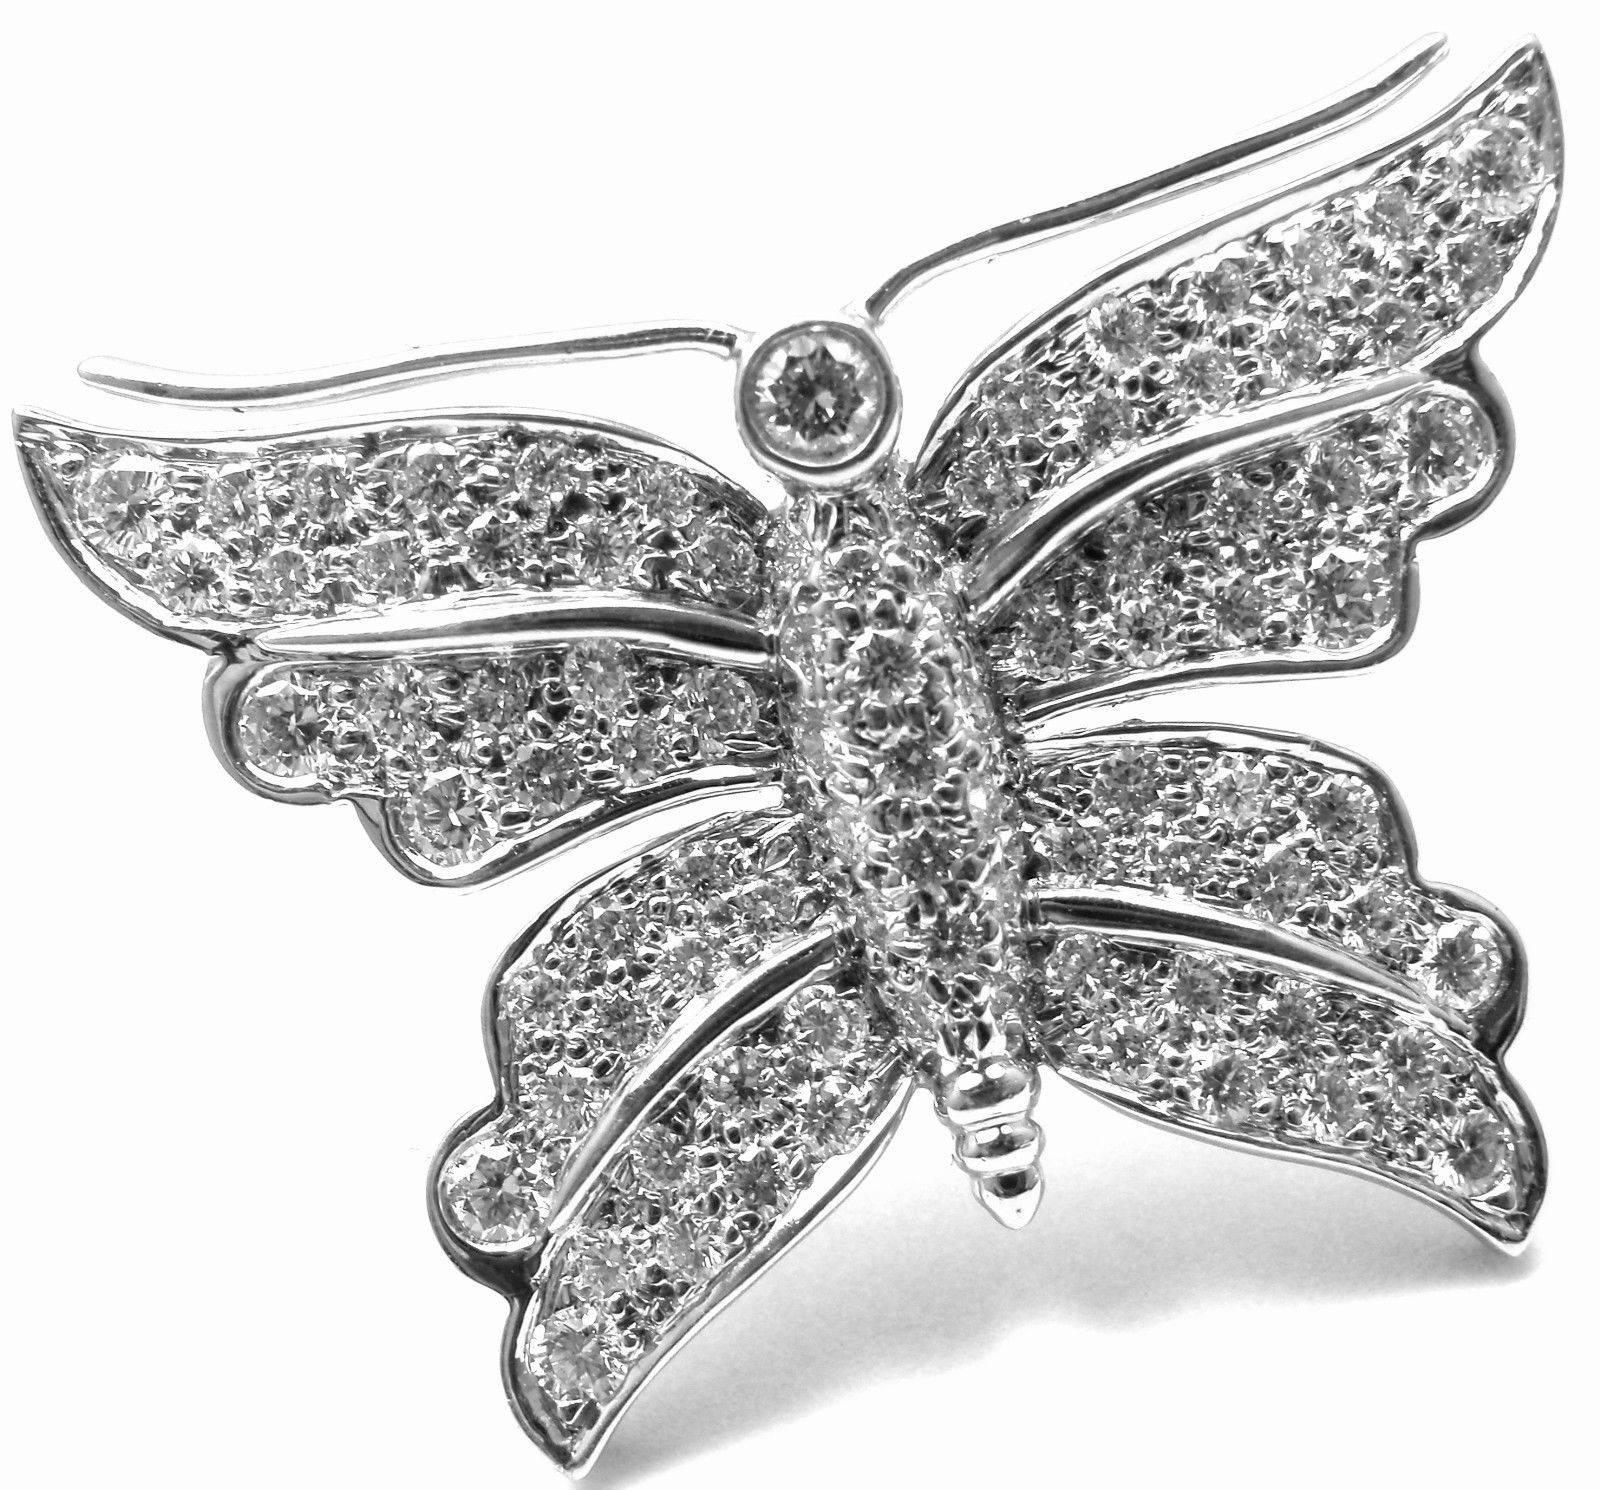 Platinum Diamond Butterfly Brooch Pin by Tiffany & Co. 
With round brilliant cut diamonds VS1 clarity, G color total weight approx. 1.25ct

Details:
Measurements: 1